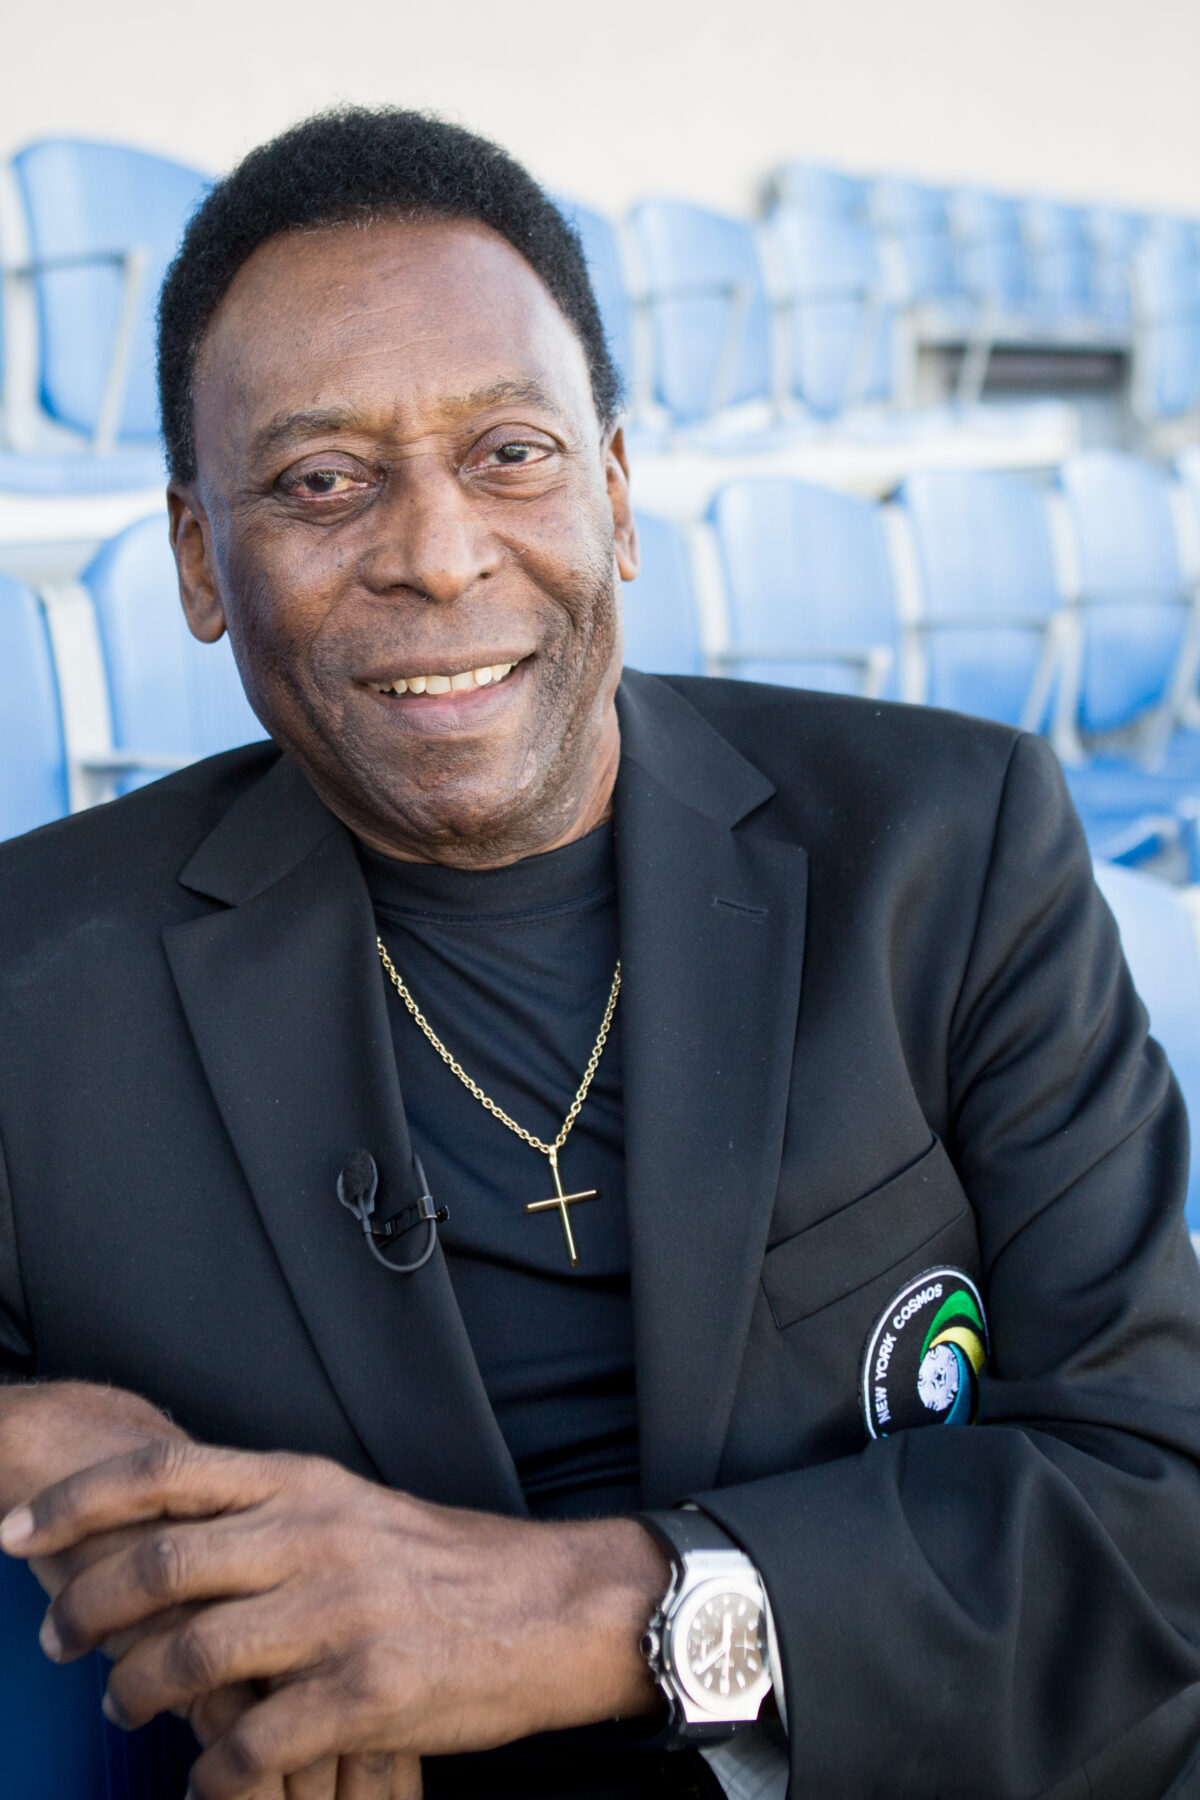 Legendary Cosmos and Brazil player Pelé prior to the Soccer, 2015 NASL NY Cosmos vs Tampa Bay Rowdies on April 18, 2015 at James M Shuart Stadium in Hempstead, NY, USA . Photo �� Ira L. Black (Photo by Ira Black/Corbis via Getty Images)